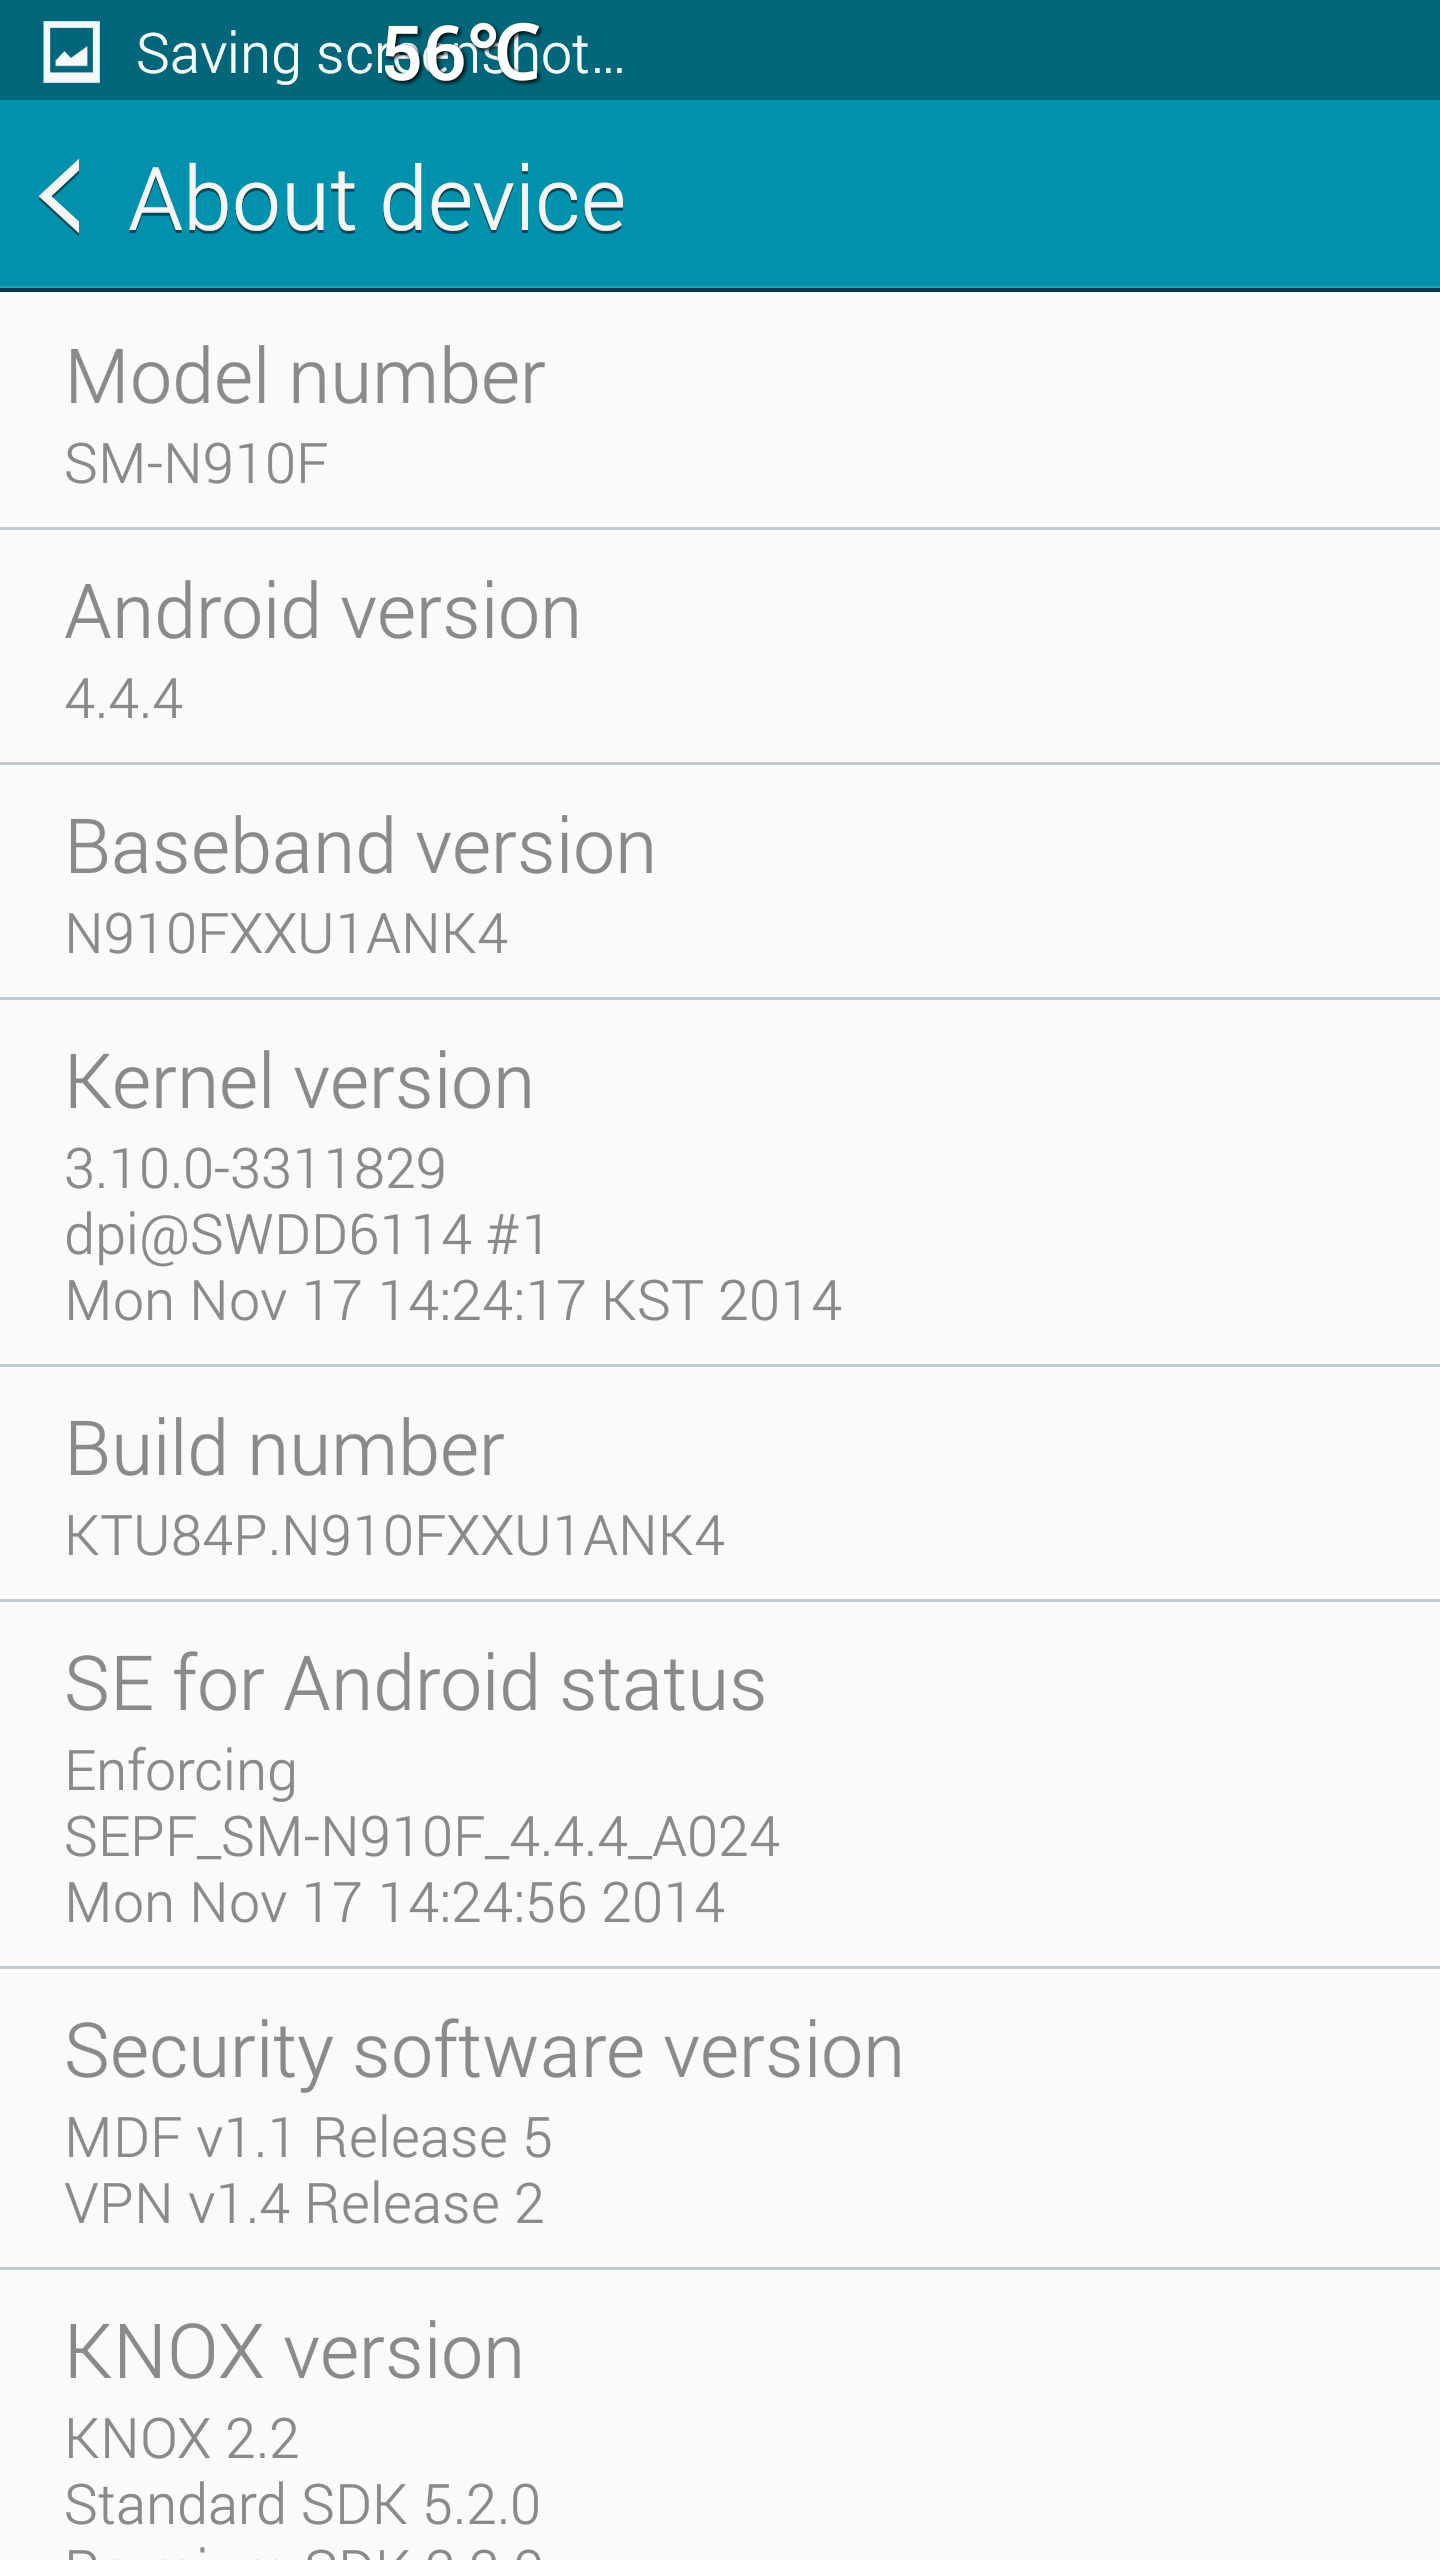 Screenshot by panosfast from the XDA board - Samsung Galaxy Note 4 owners in Europe receive "minor" 137MB OTA update